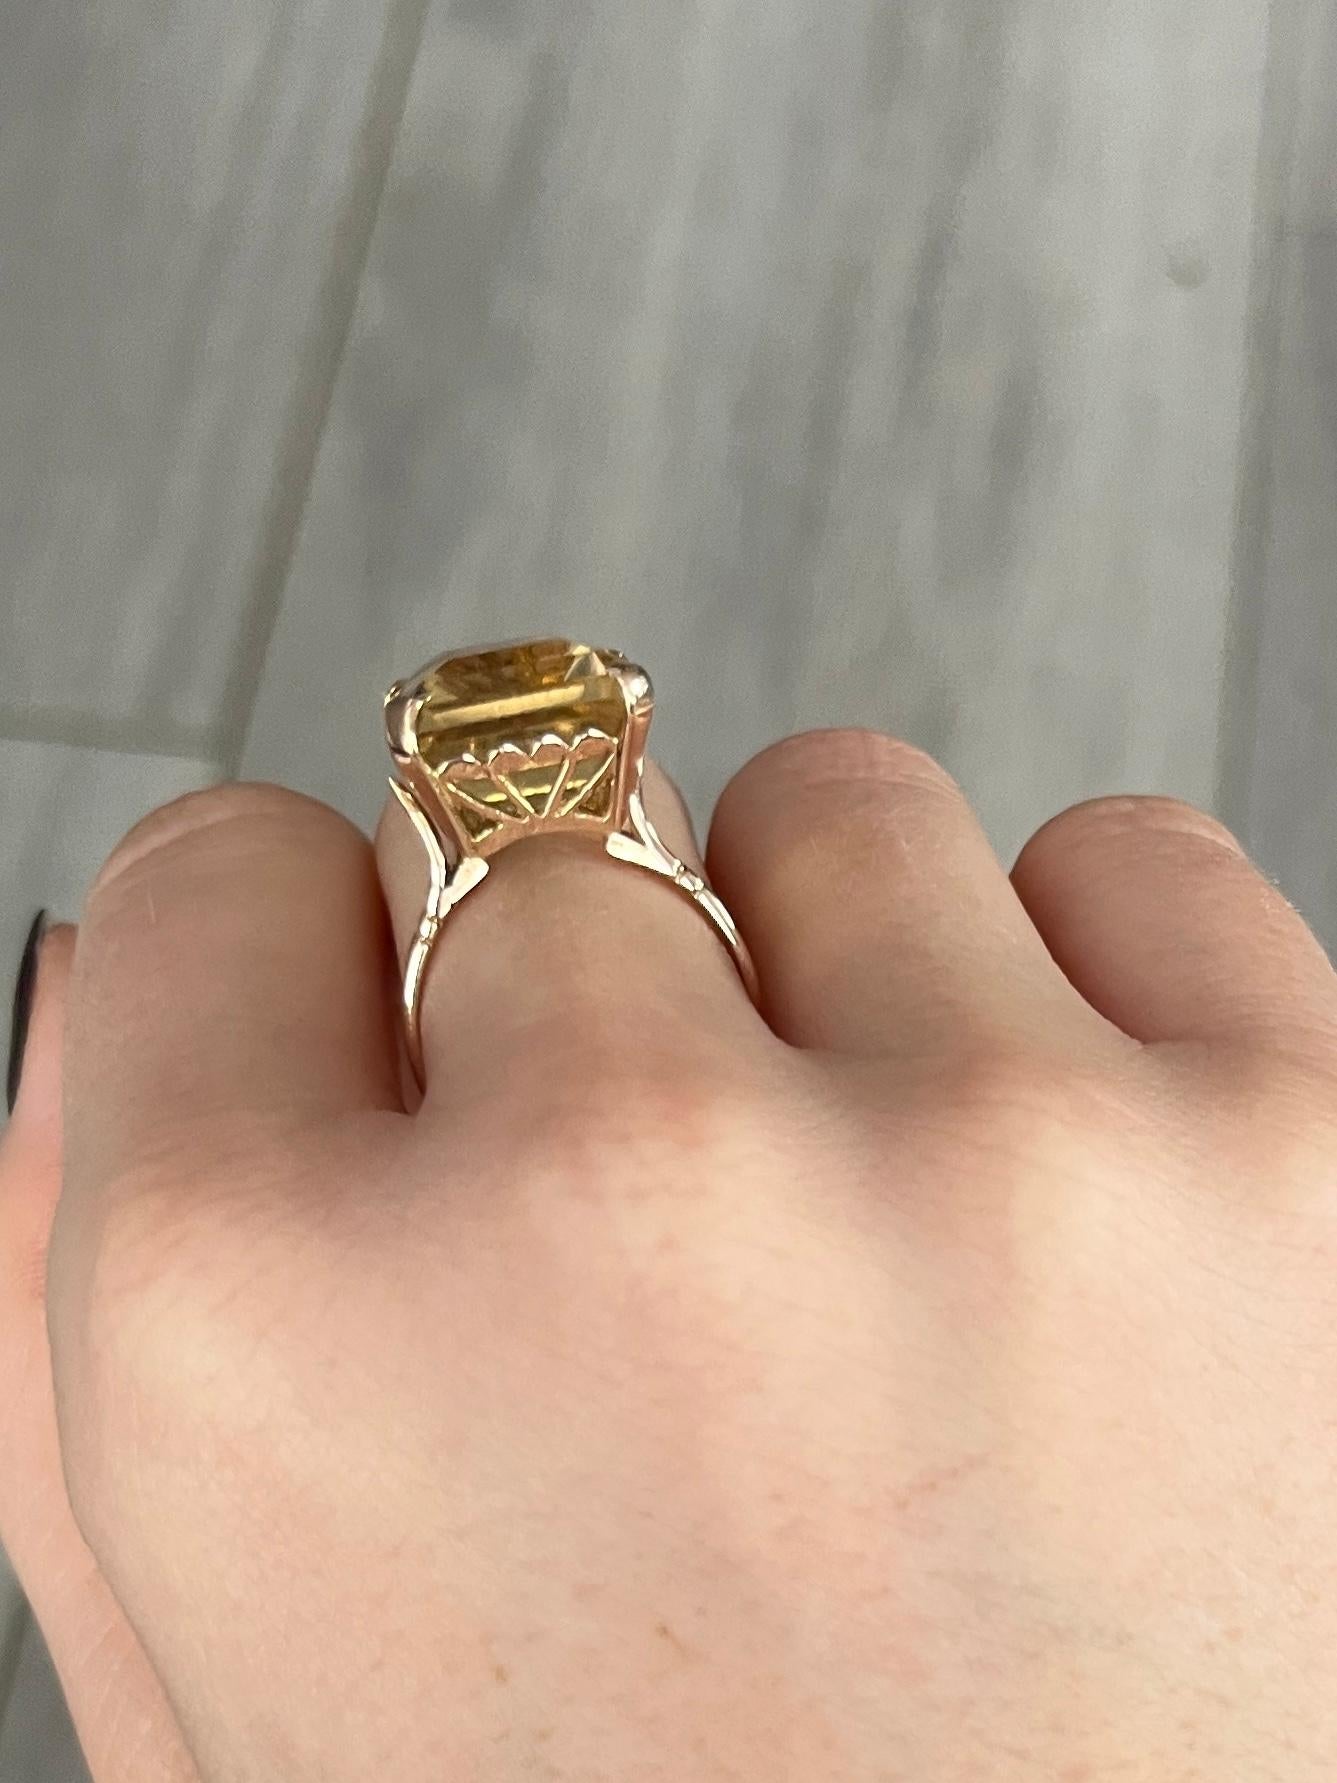 The gorgeous citrine stone is a pale yellow colour set in simple claws. The gallery is open and decorative and all modelled in 9carat gold. 

Ring Size: O or 7 1/4 
Stone Dimensions: 17x13mm
Height Off Finger: 8.5mm 

Weight: 6.2g